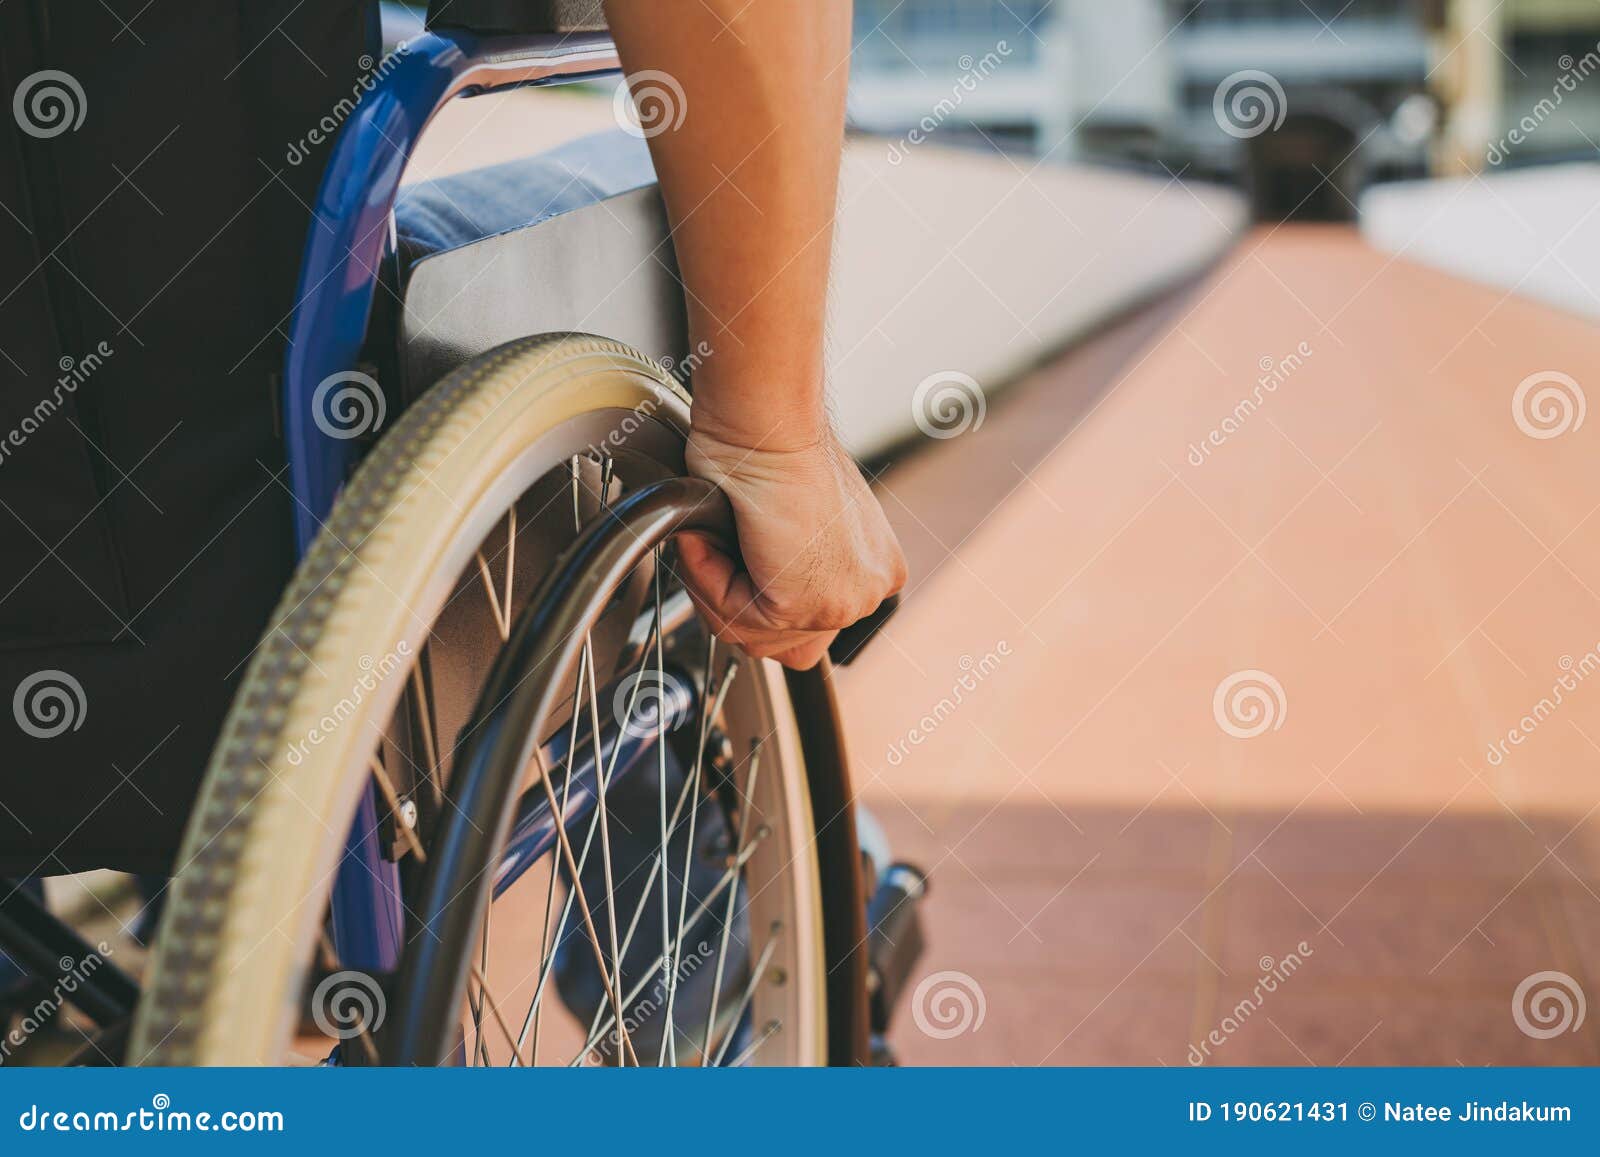 people with disabilities can access anywhere in public place with wheelchair,that make them independent in transportation and feel